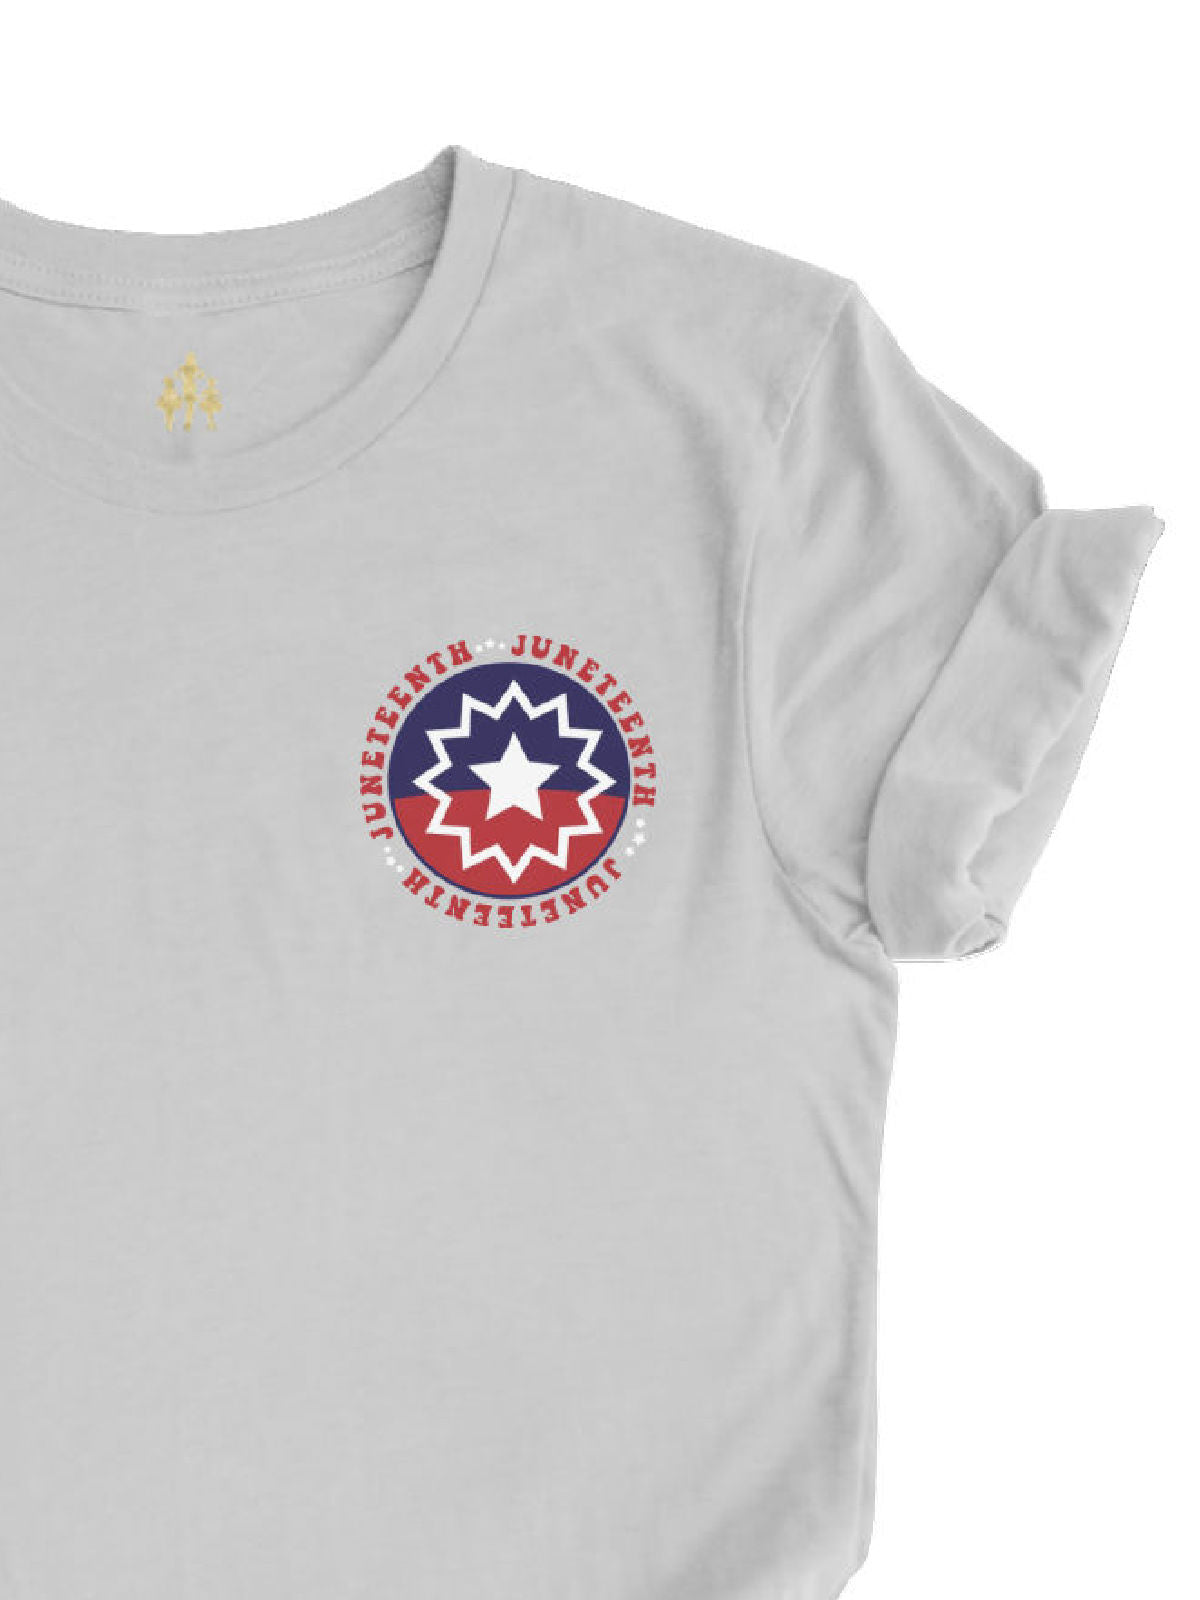 Juneteenth Flag Shirt for Adults in Heather Gray